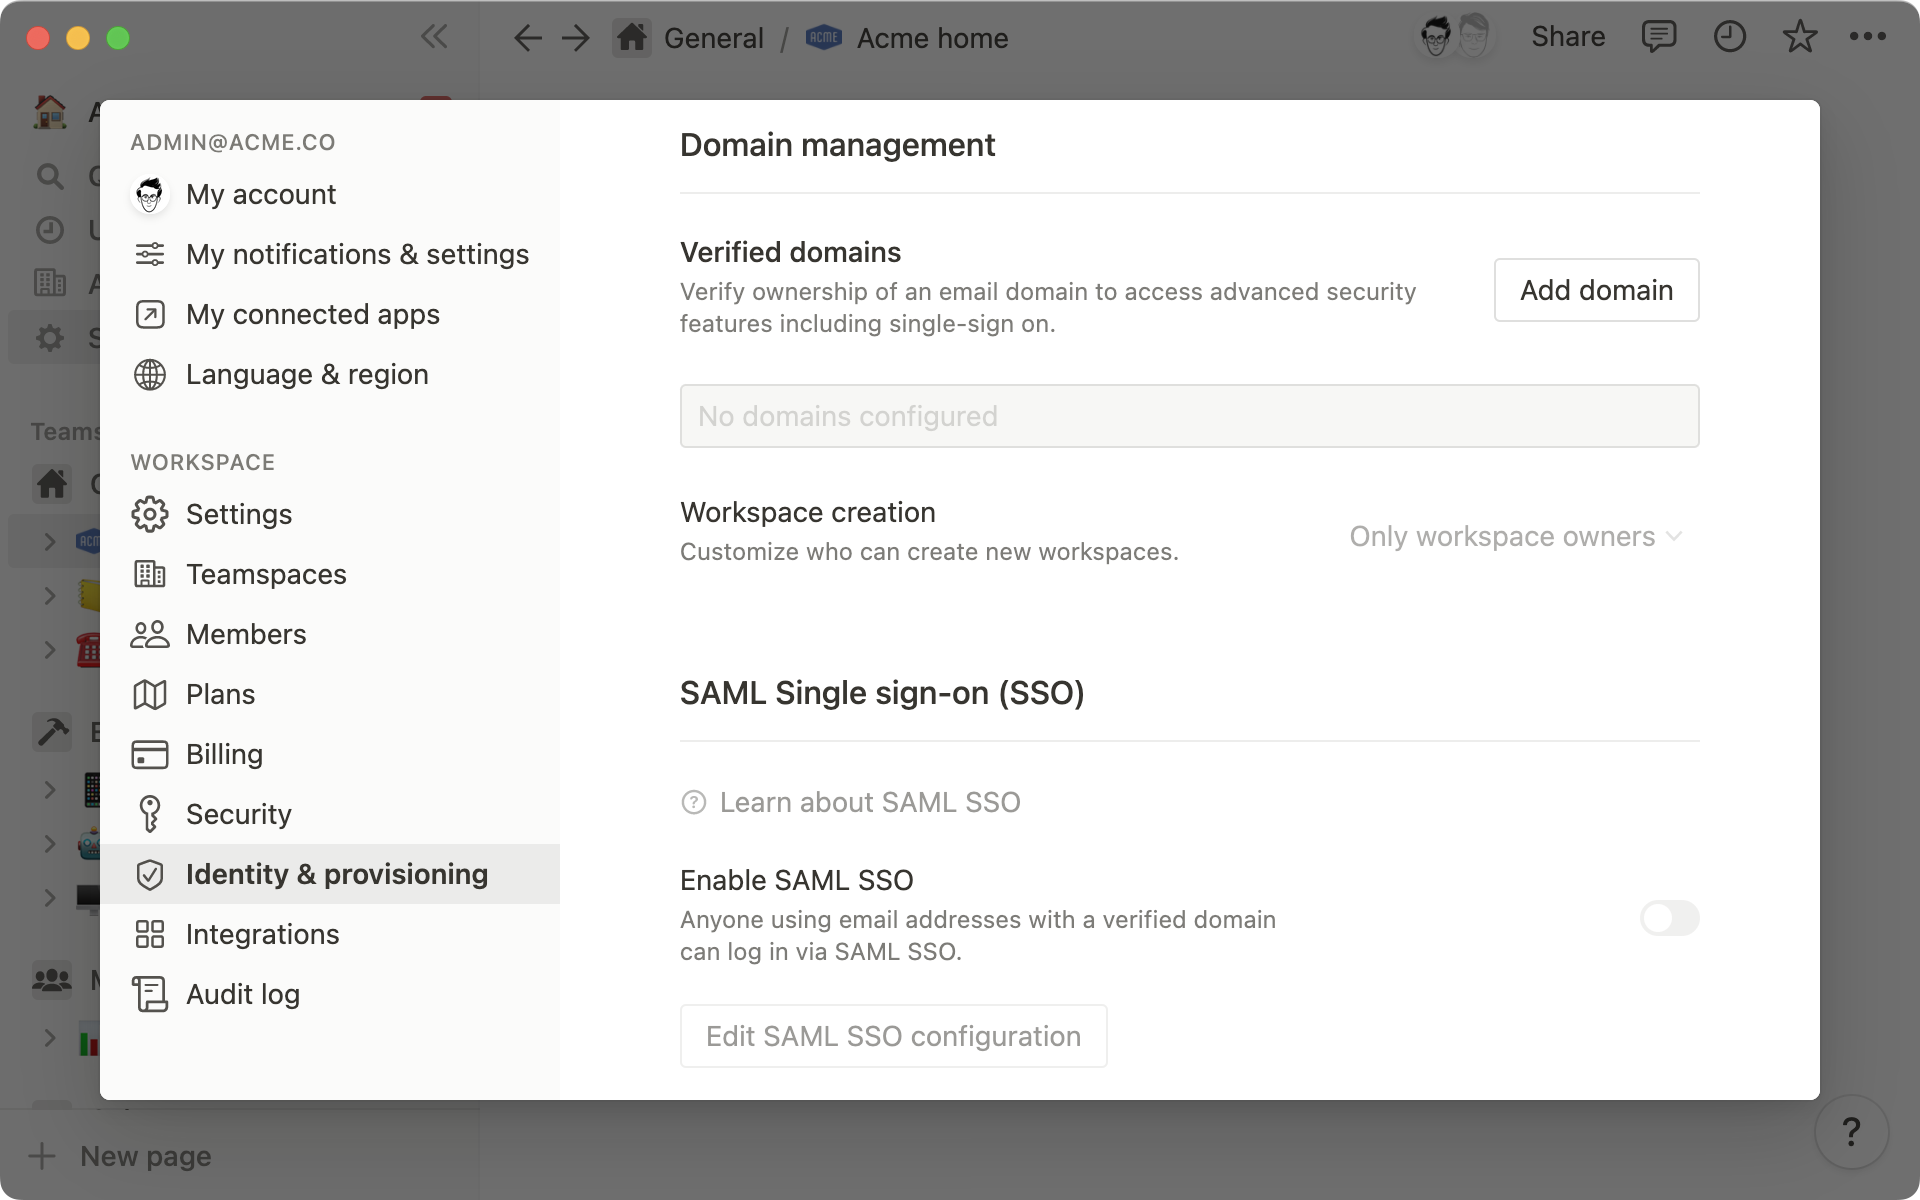 A screenshot of Notion's settings, showing configuration for Domain management and SAML SSO.